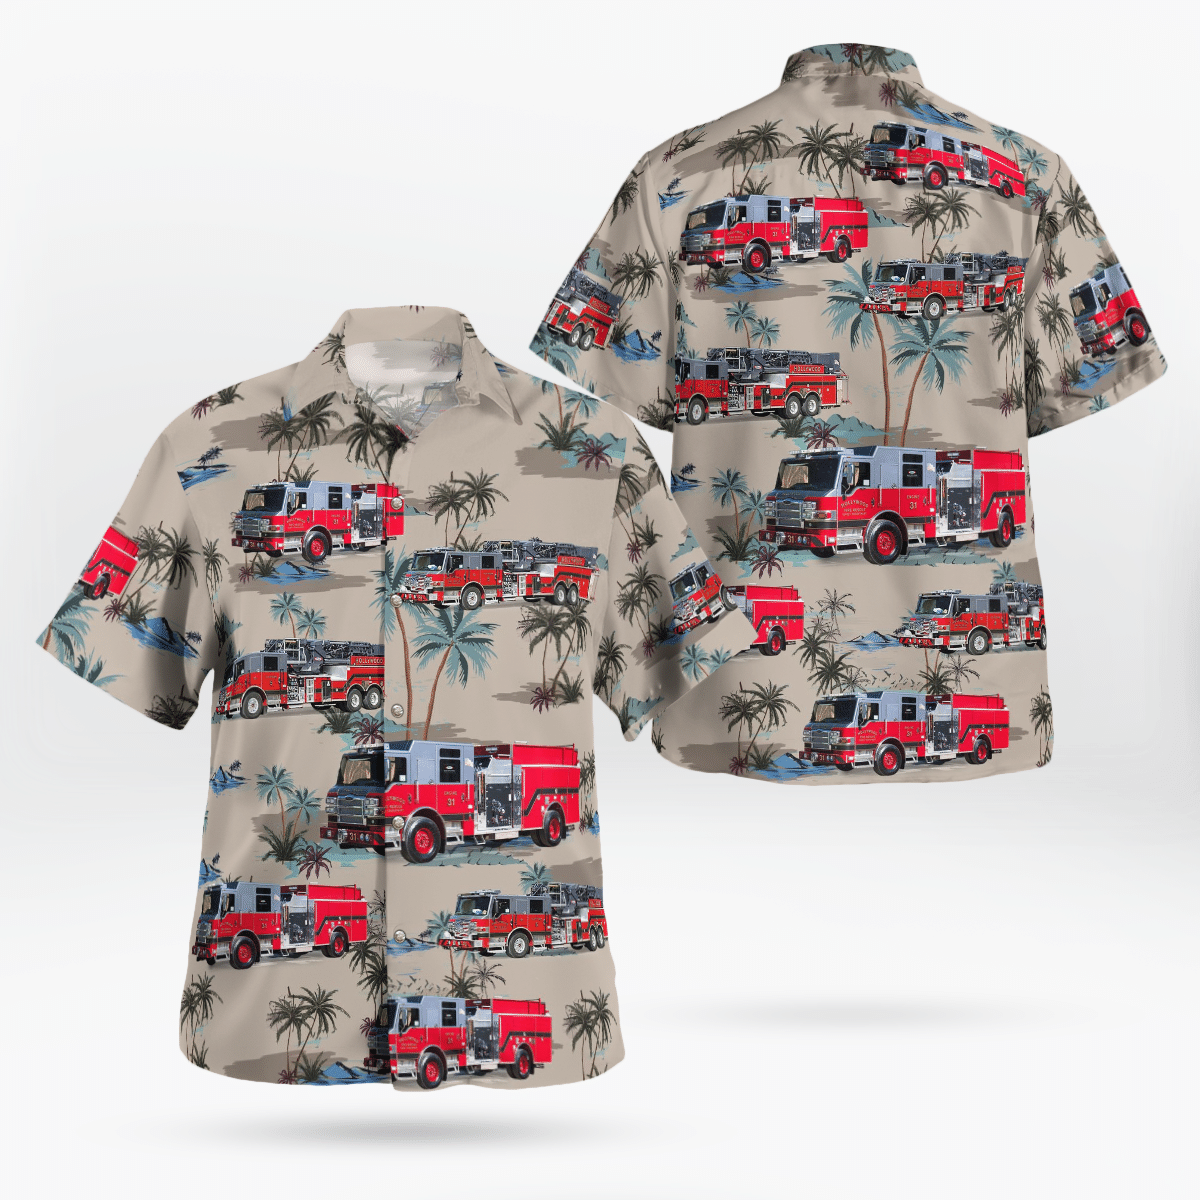 Top Hawaiian shirts are perfect for hot and humid days 182